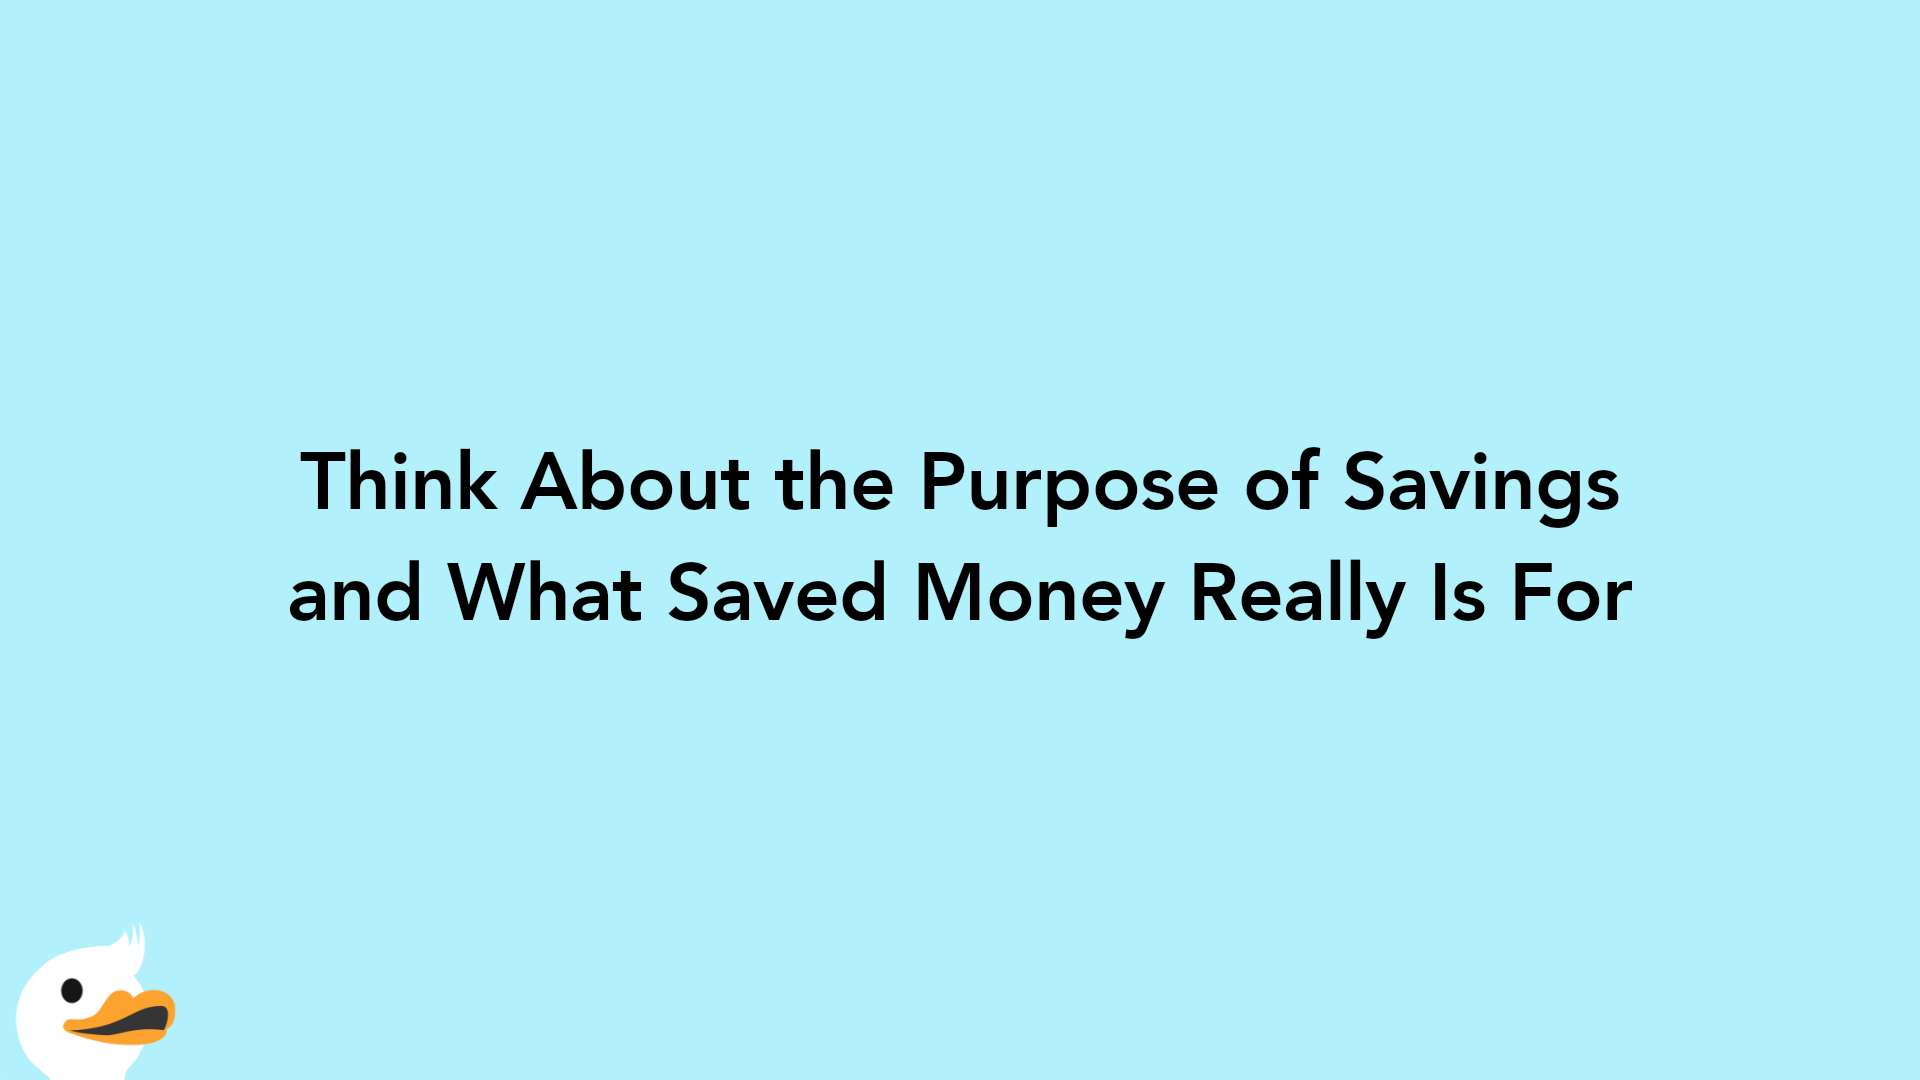 Think About the Purpose of Savings and What Saved Money Really Is For